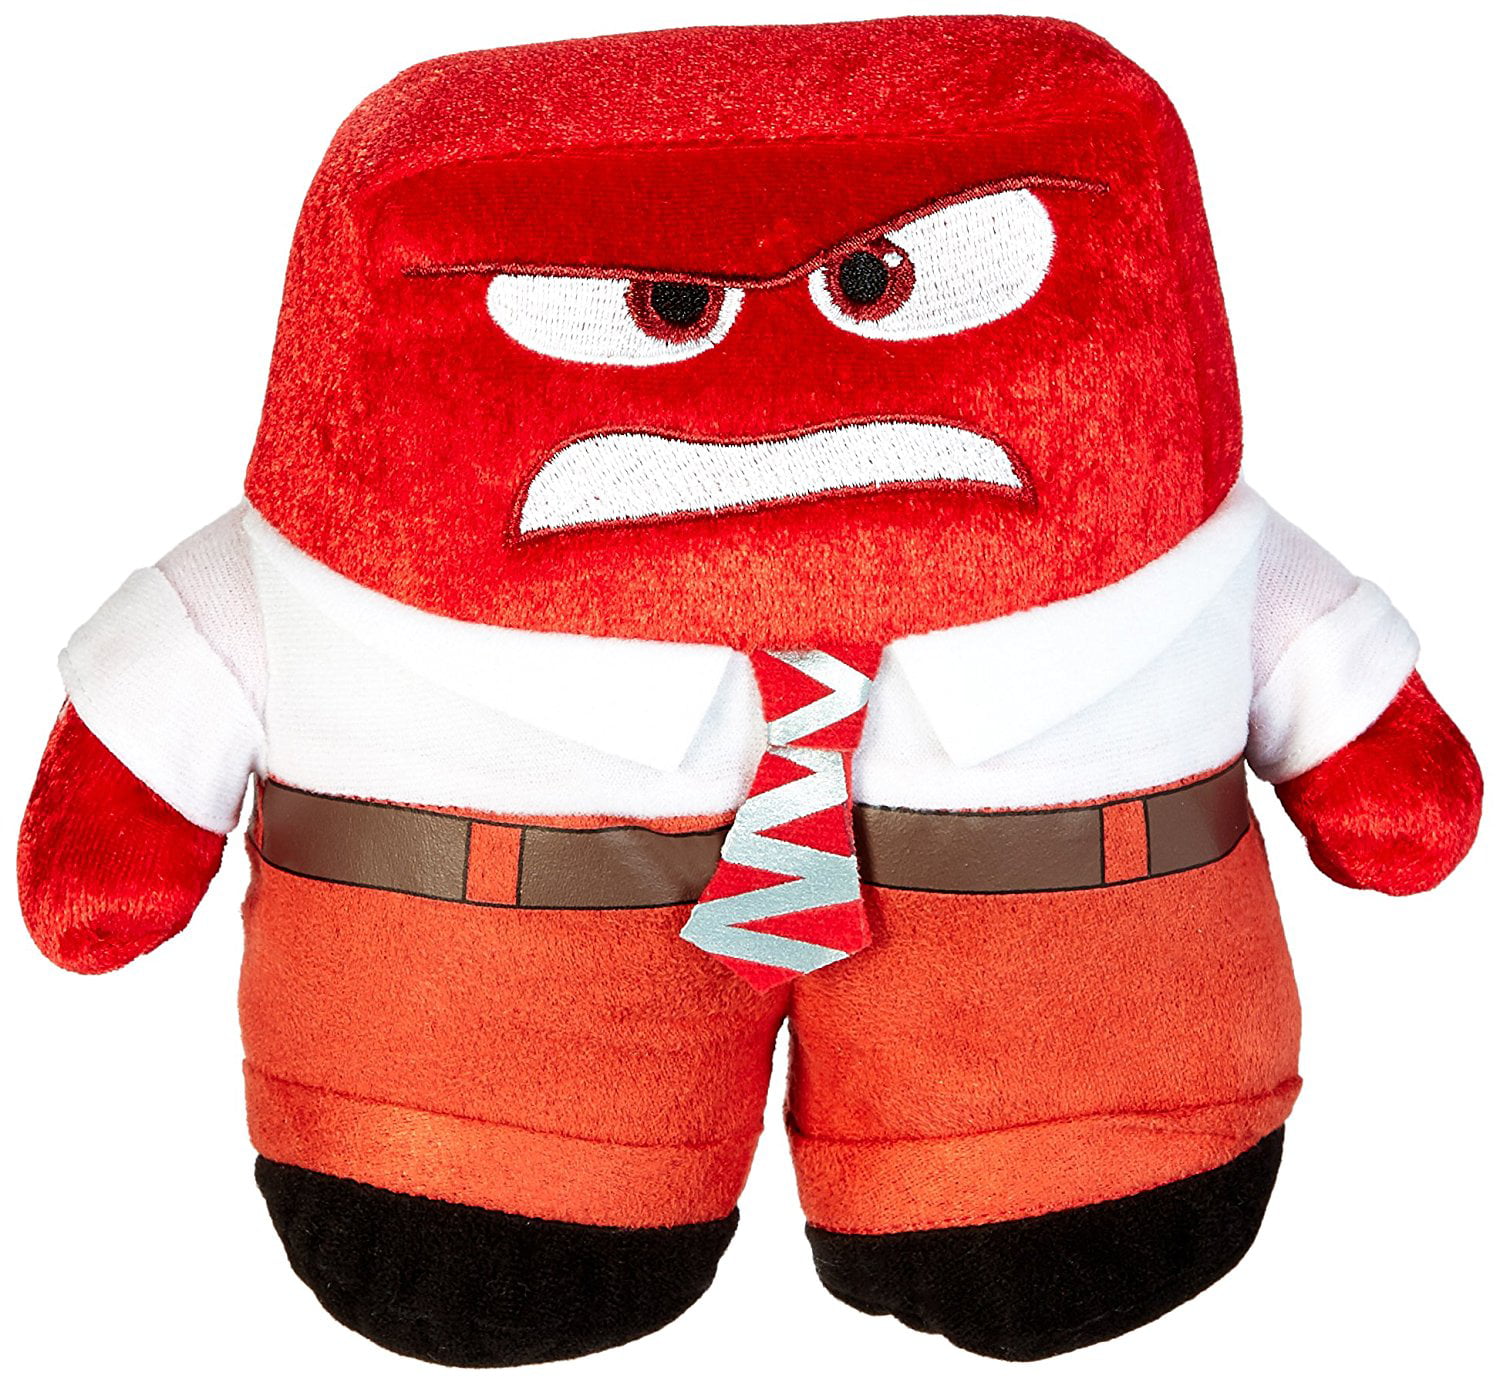 inside out anger plush